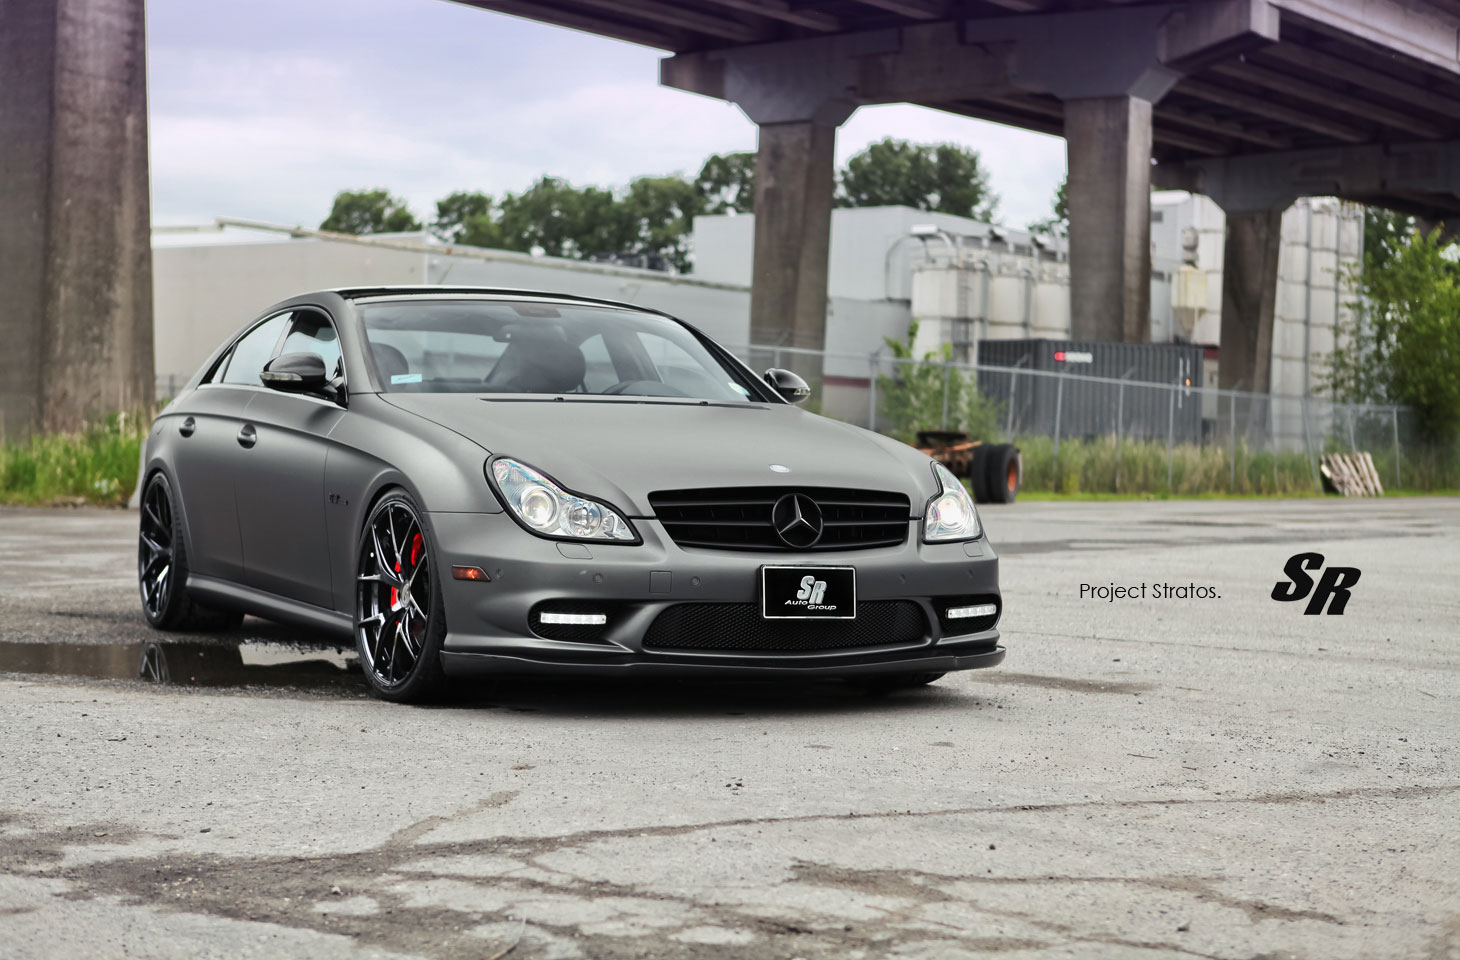 Mercedes-Benz CLS63 AMG jako Project Stratos 3